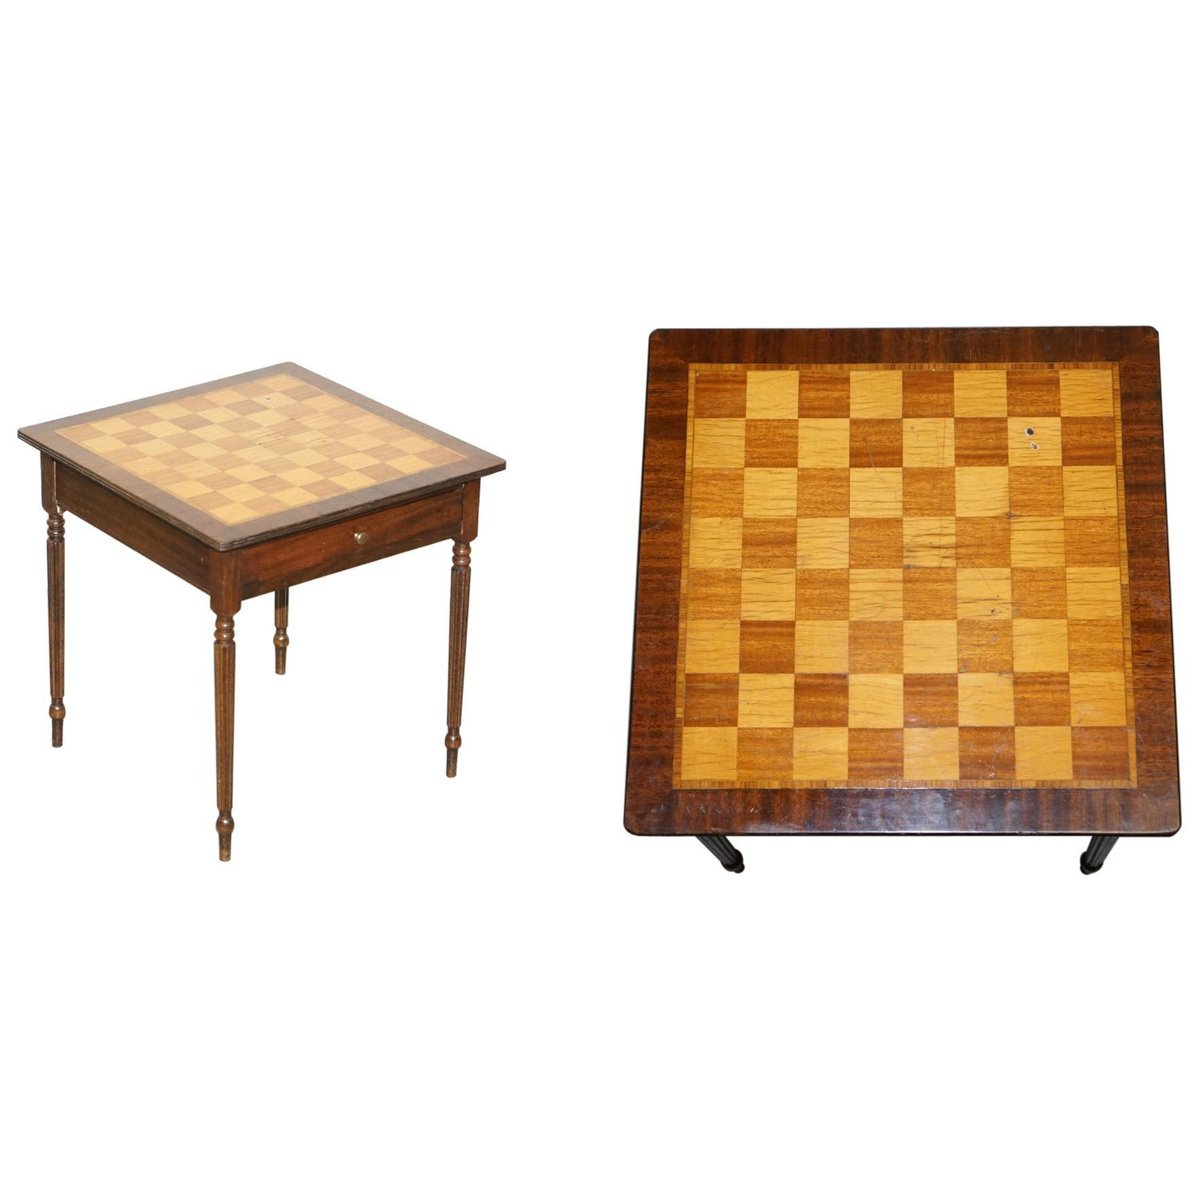 vintage inlaid walnut hardwood game table with chessboard drawer GZP-1006436